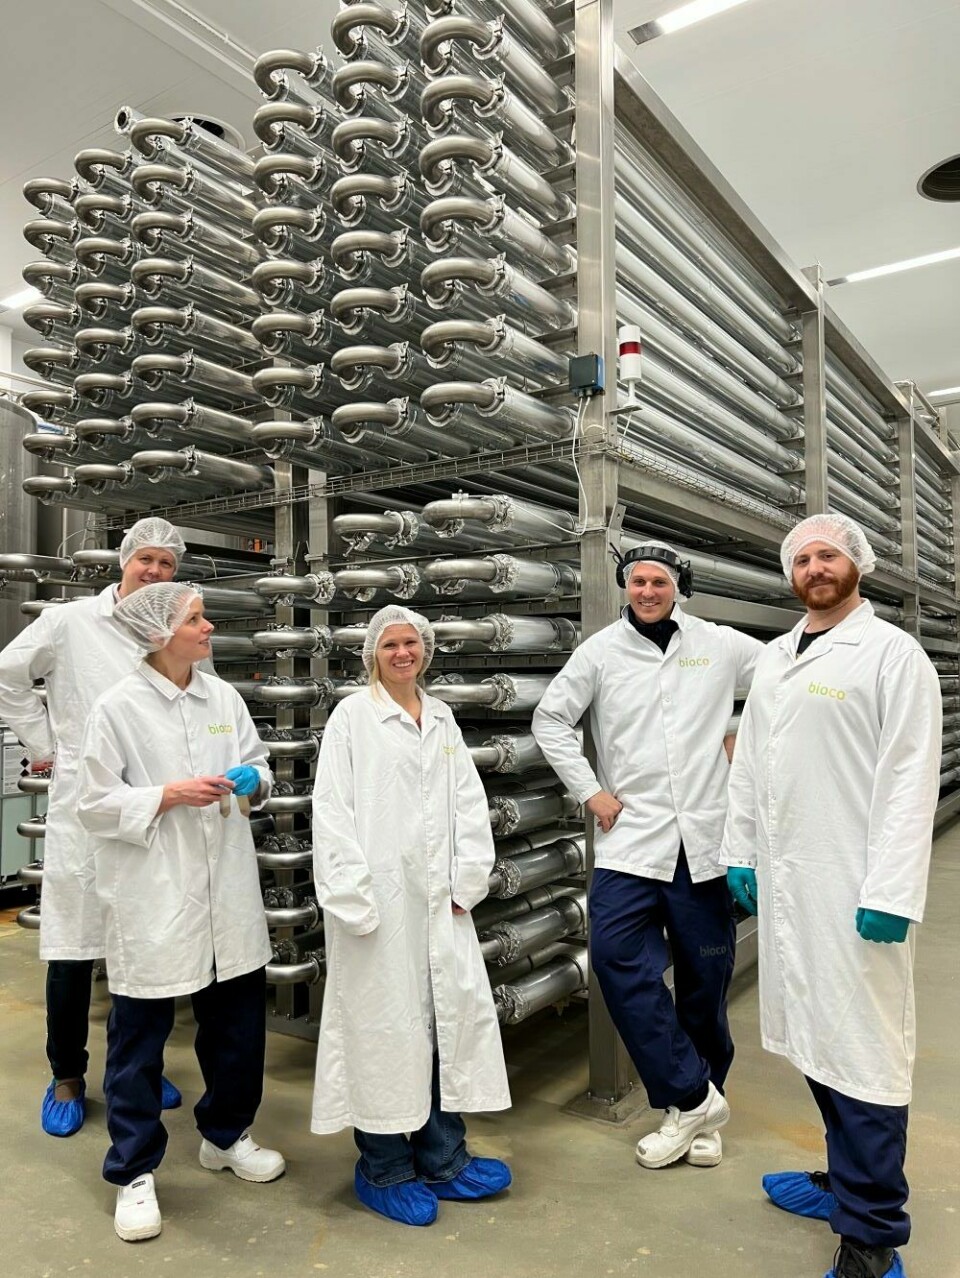 From left: Nils Kristian Afseth, Katinka Dankel, Ingrid Måge, Jonathan Fjällman, and Marco Cattaldo in front of the process line for continuous enzymatic hydrolysis in tubes.